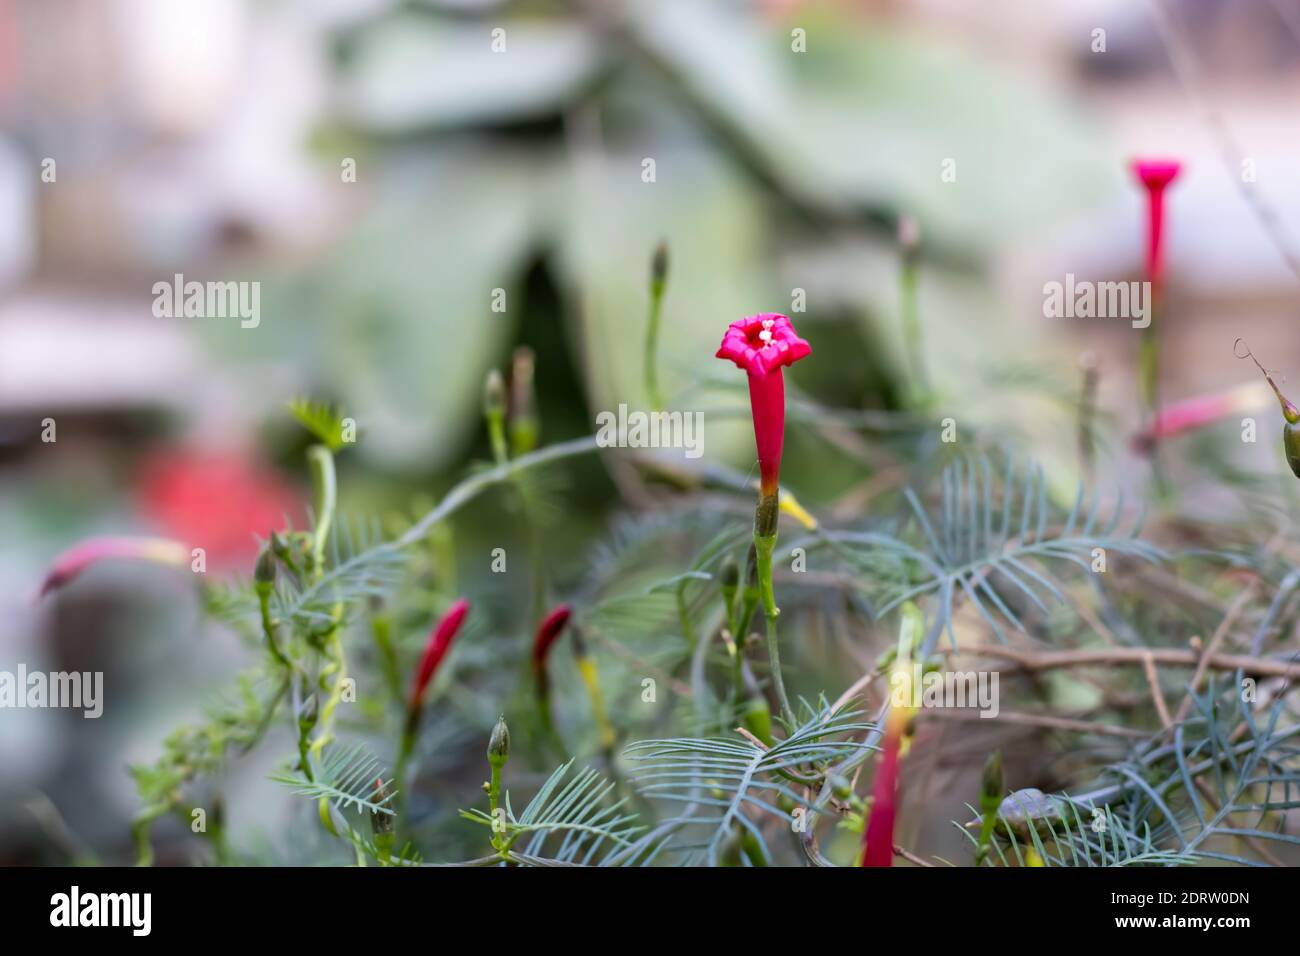 Bright red Ipomoea quamoclit flower with green leaves and unopened buds in the garden Stock Photo